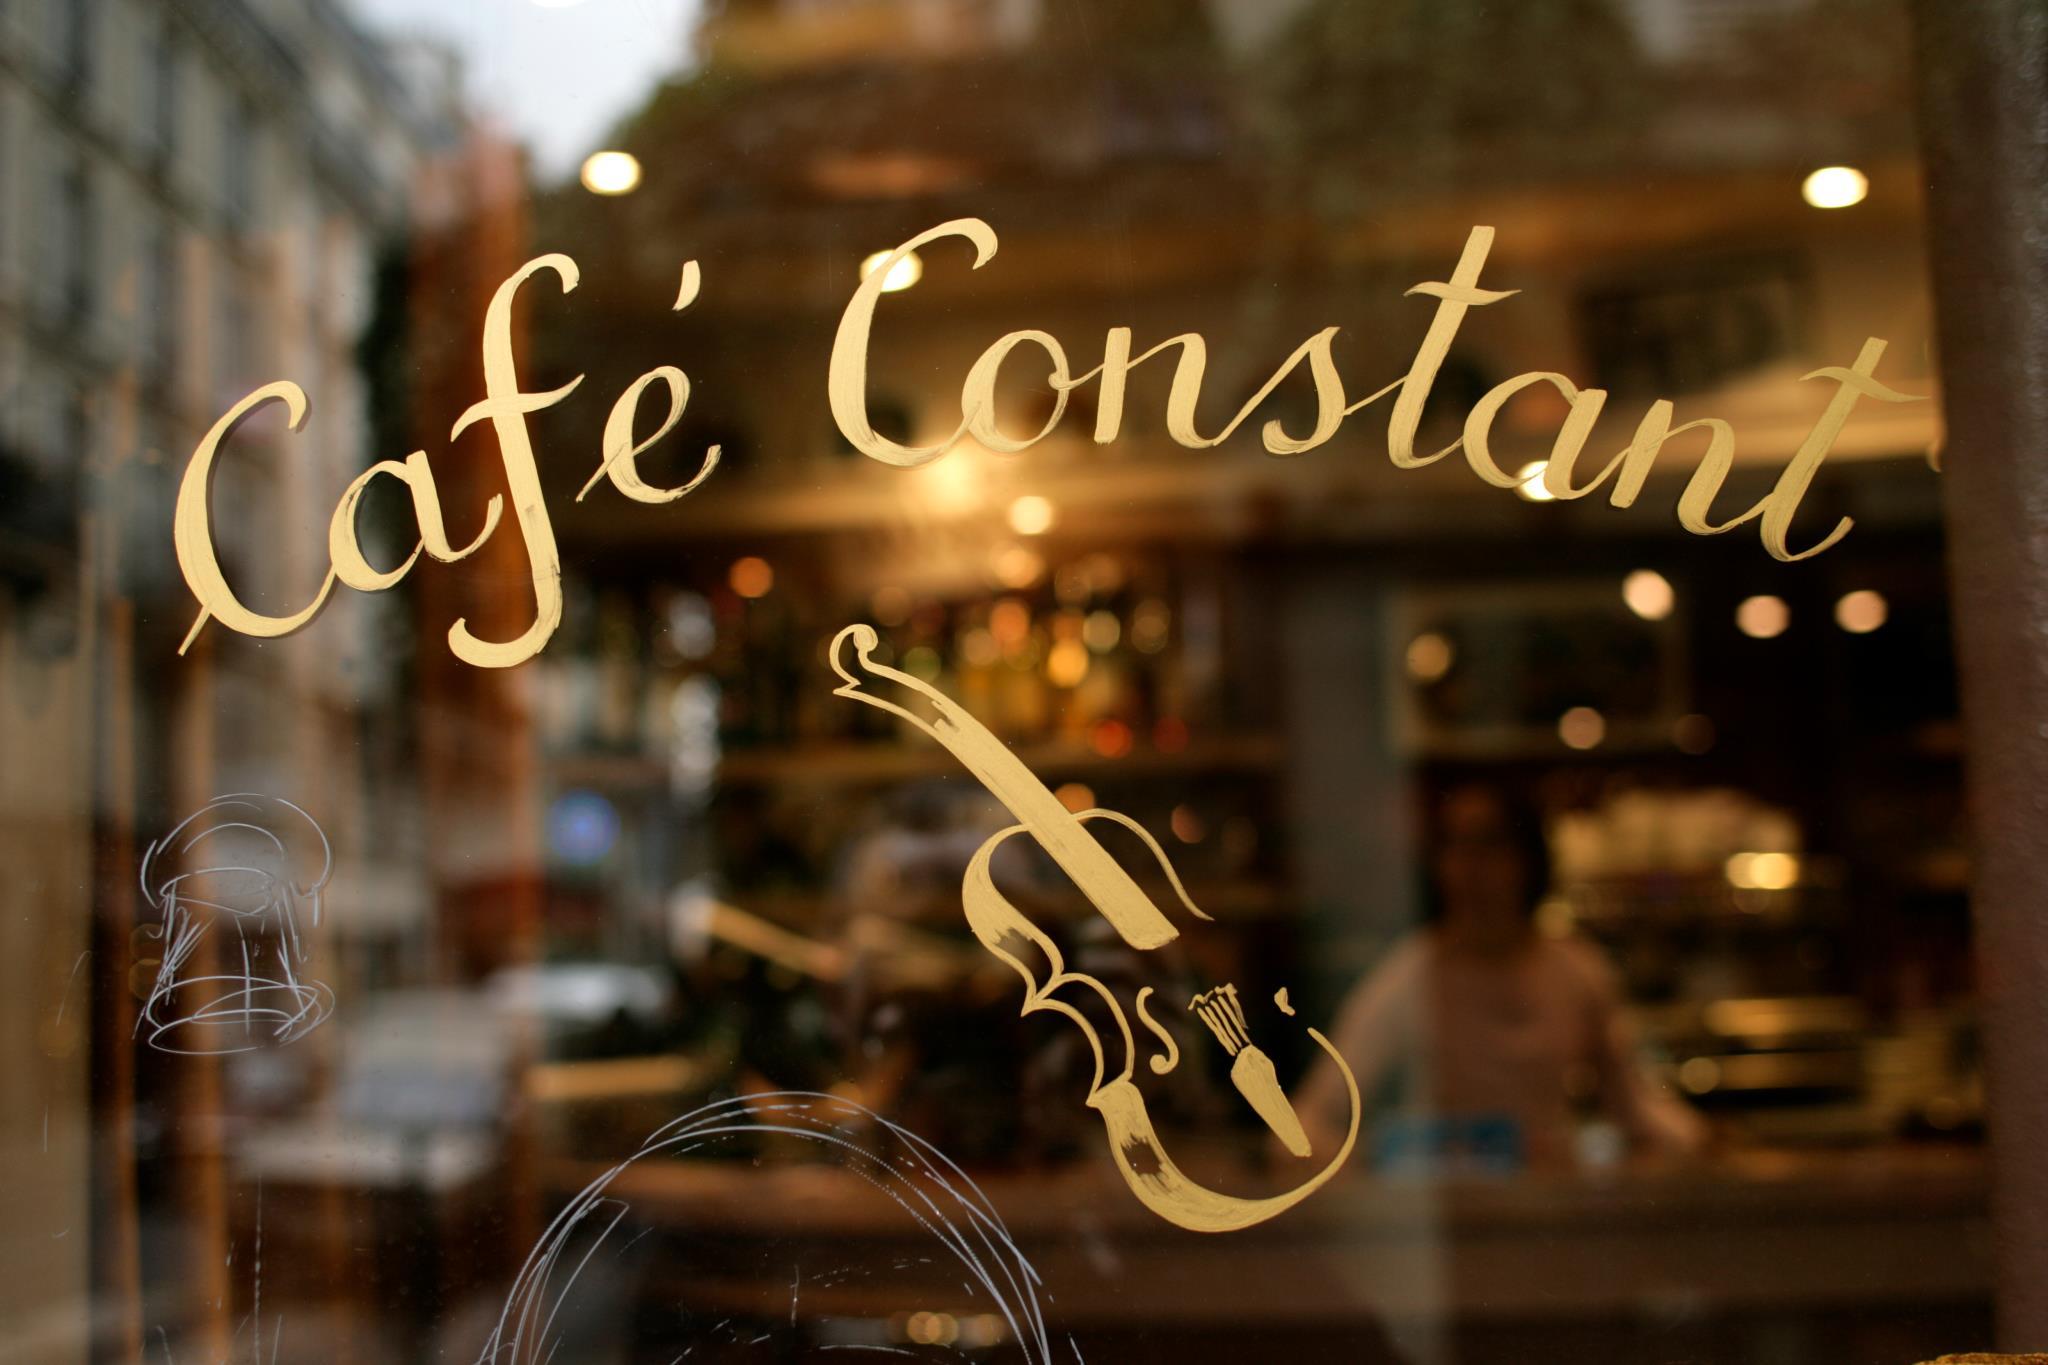 Cover image of this place Café Constant